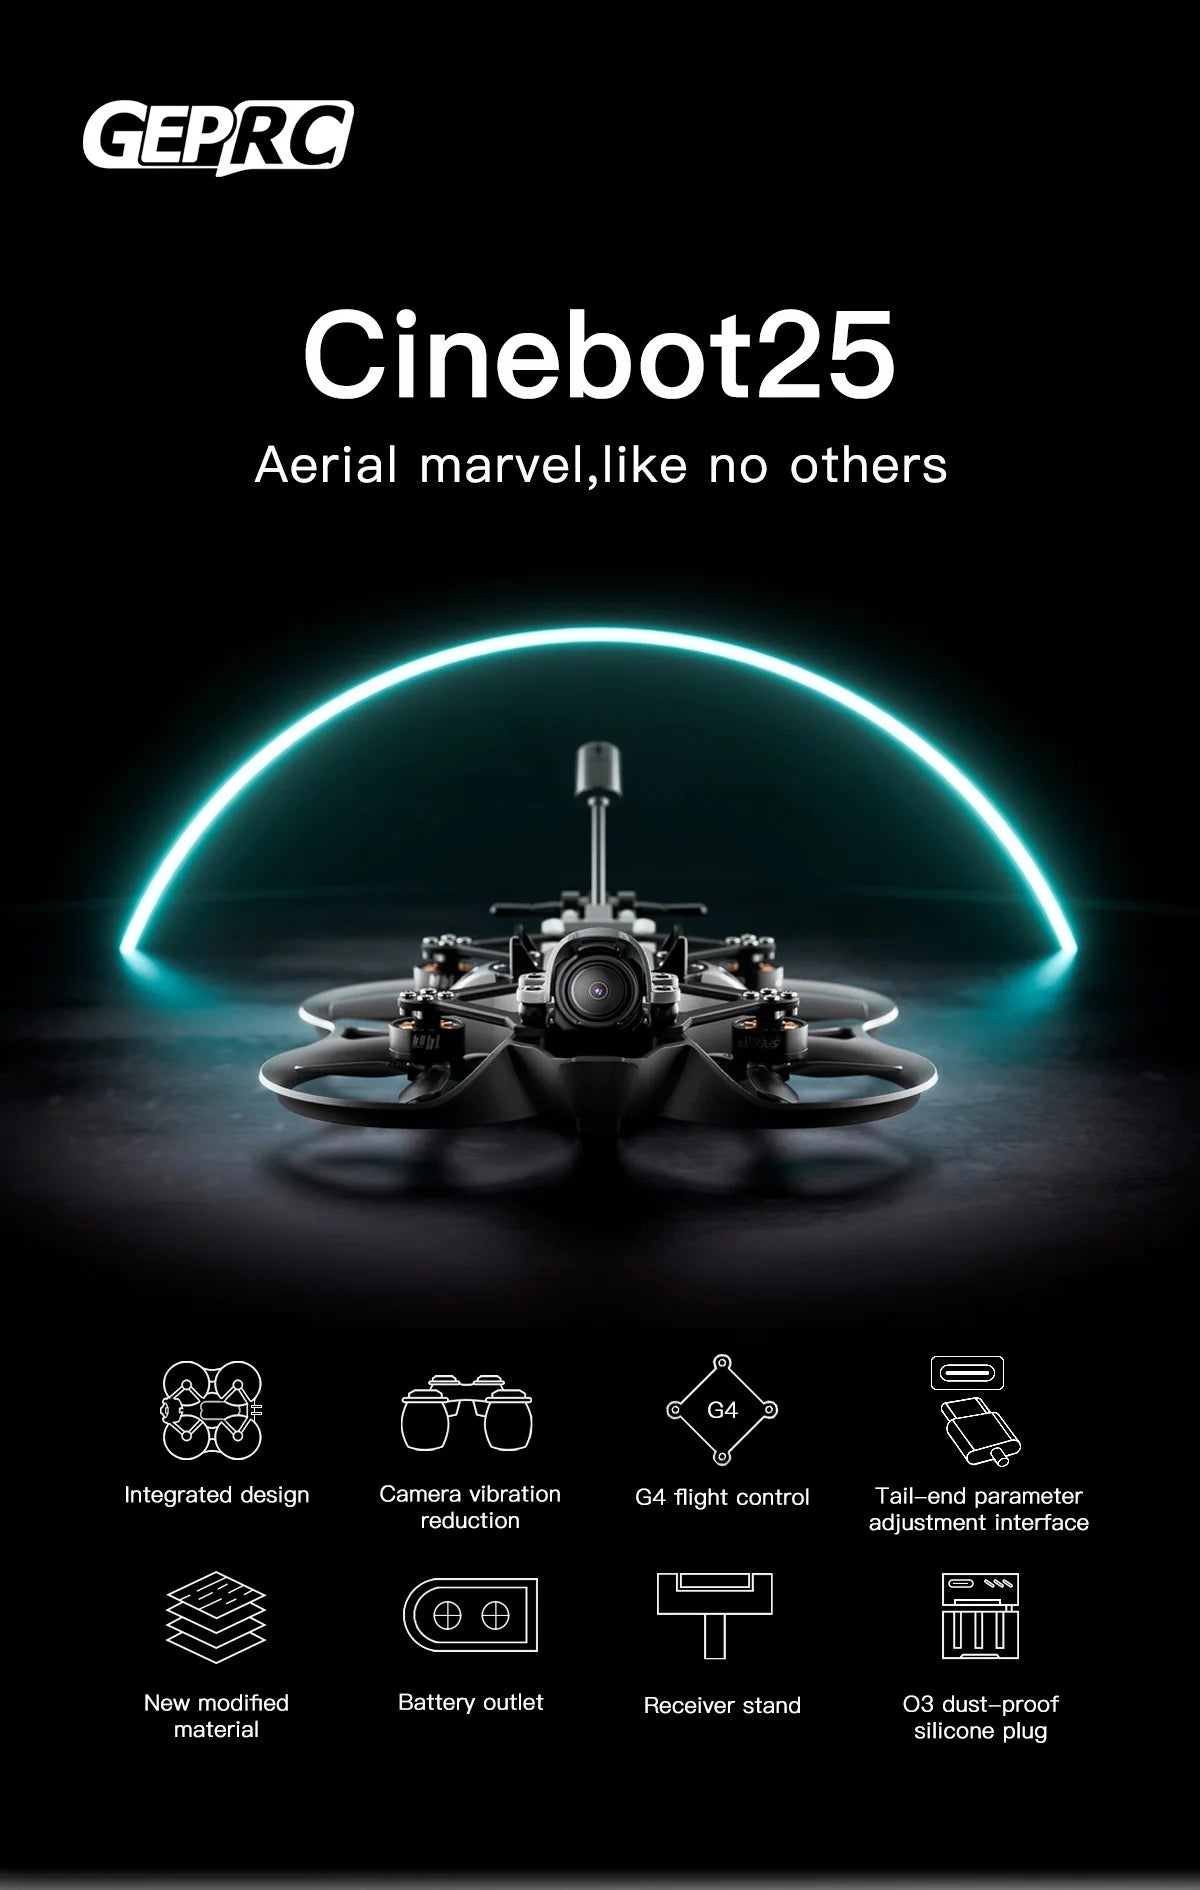 GEPRC Cinebot25 S HD Wasp FPV Drone, GEPRC Cinebot25 Aerial marvel,like no thers buhl